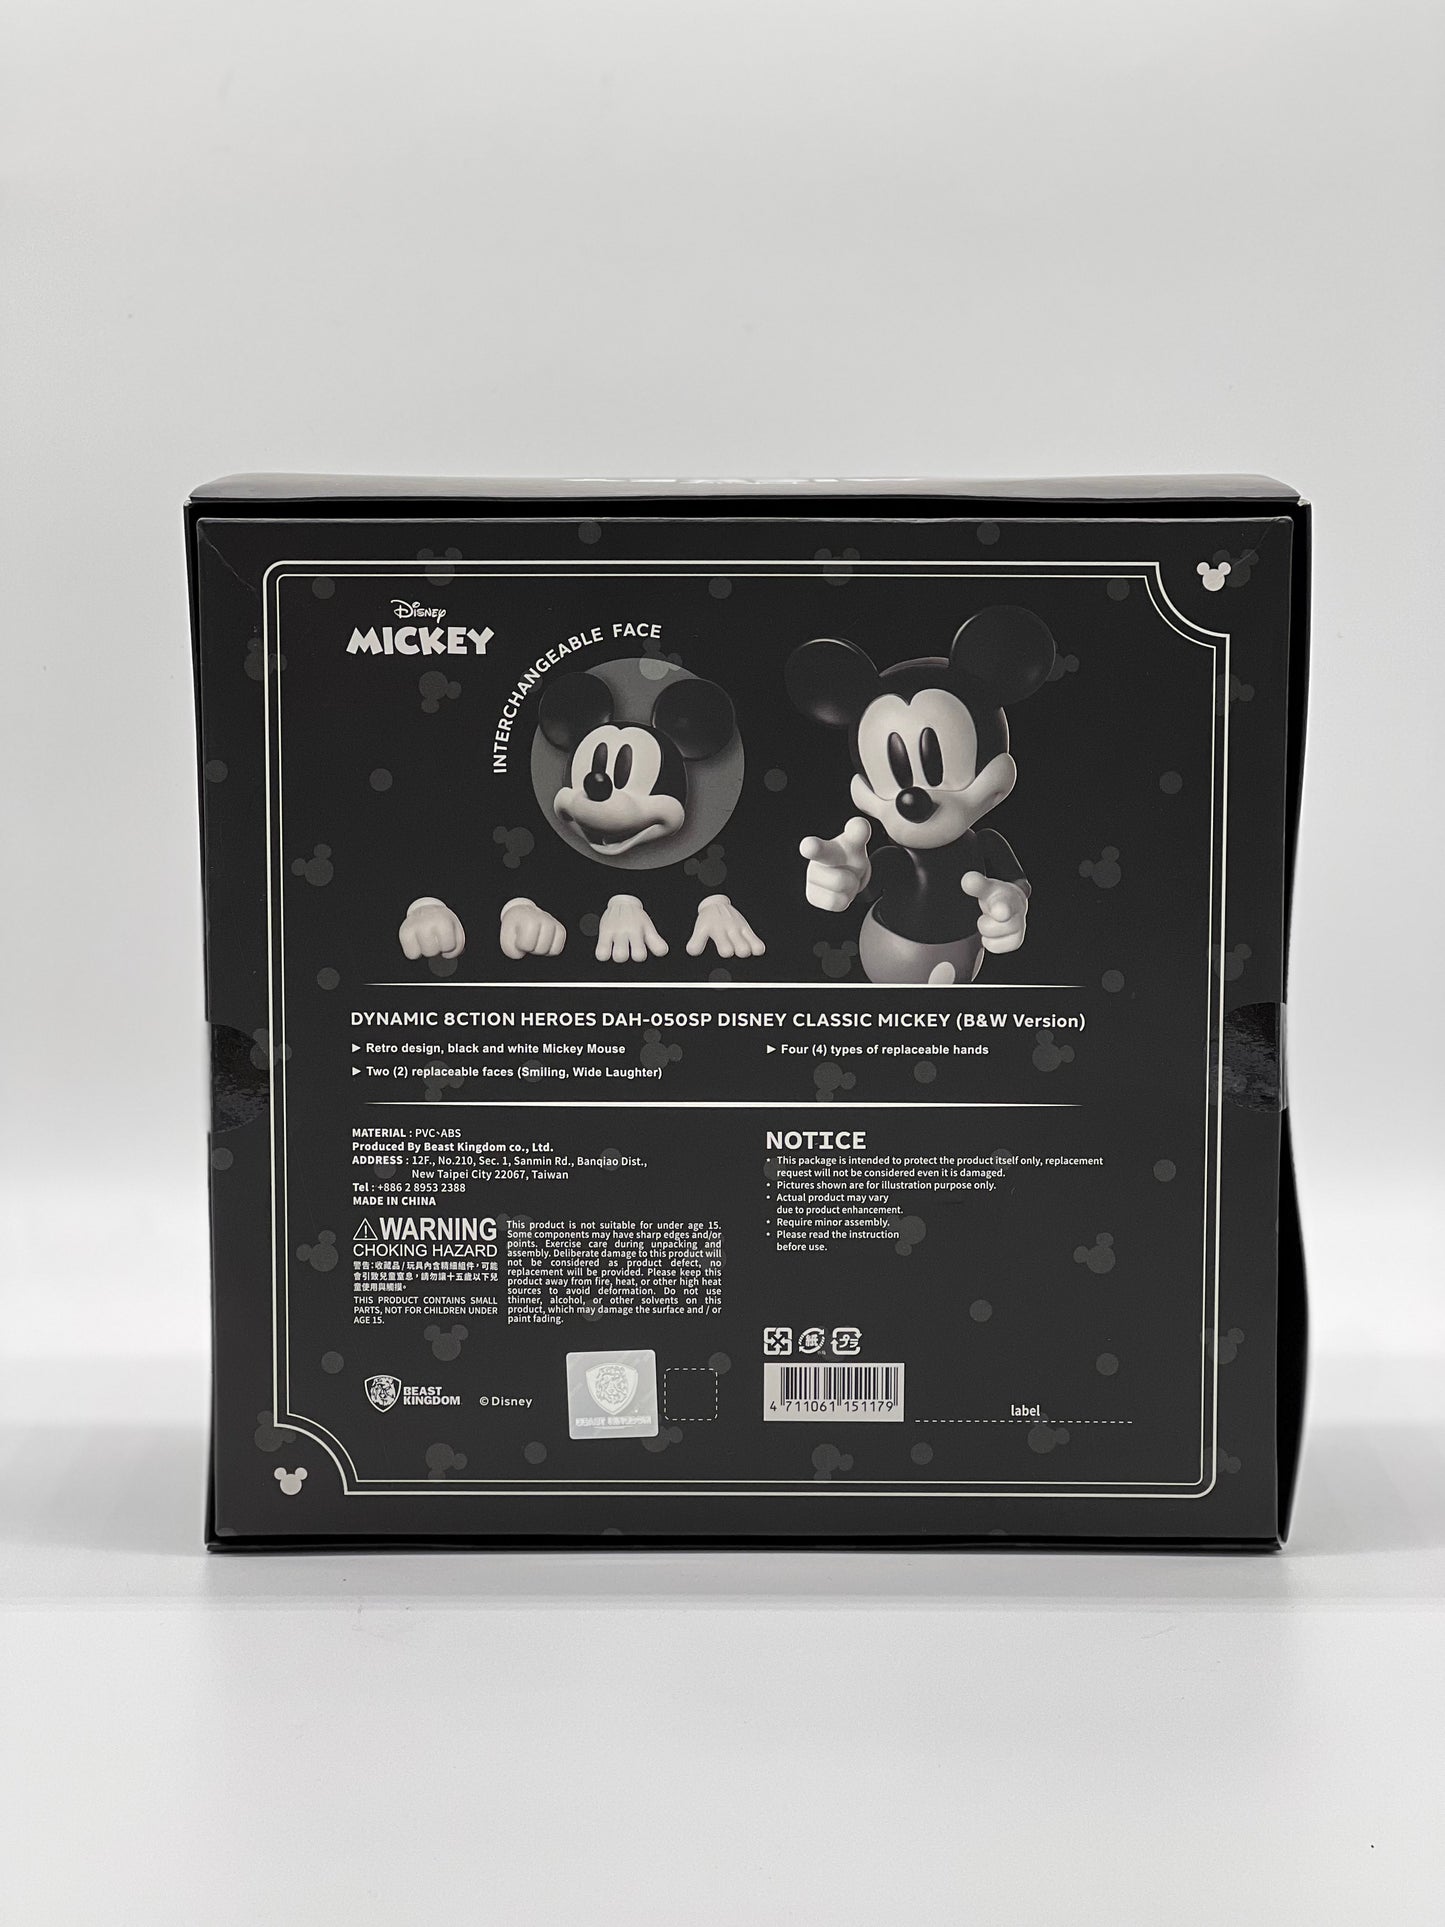 Disney Mickey DAH - 050SP Classic Mickey B&W Version 2021 Exclusive 1/9TH Scale Action Figure